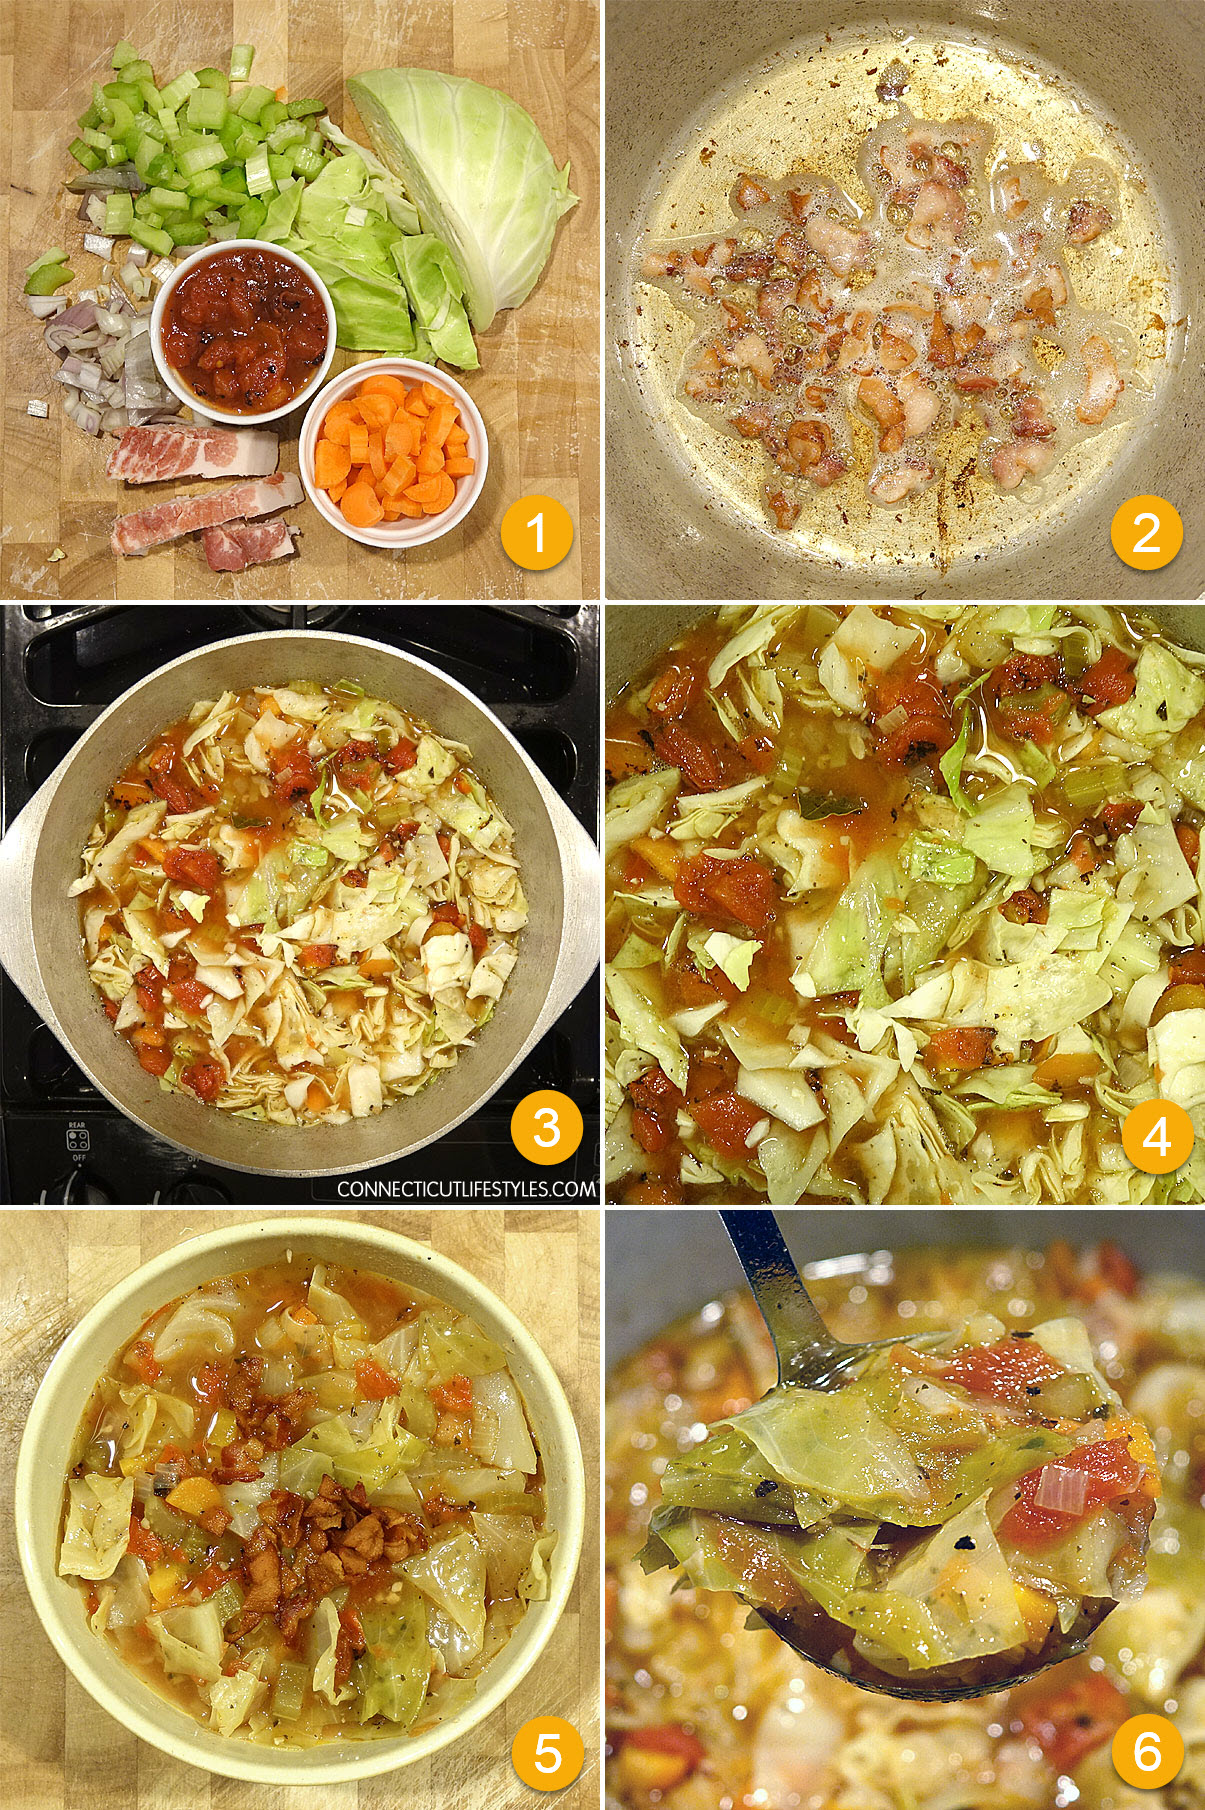 Hearty Cabbage Soup Recipe Step-by-Step Cooking Instructions